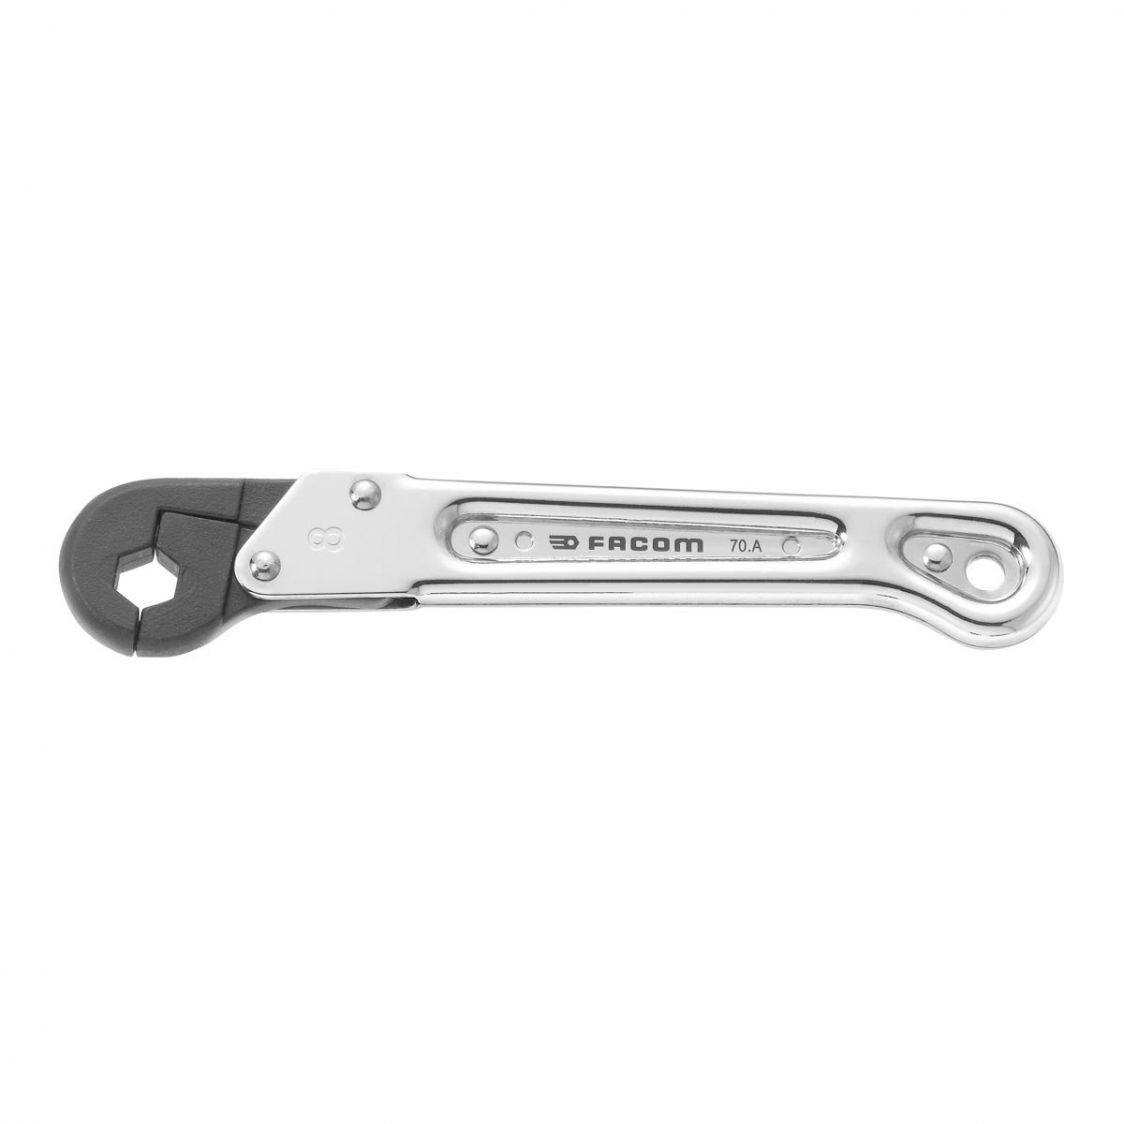 FACOM 70A.19 - 19mm Metric Ratchet Flare Nut Spanner